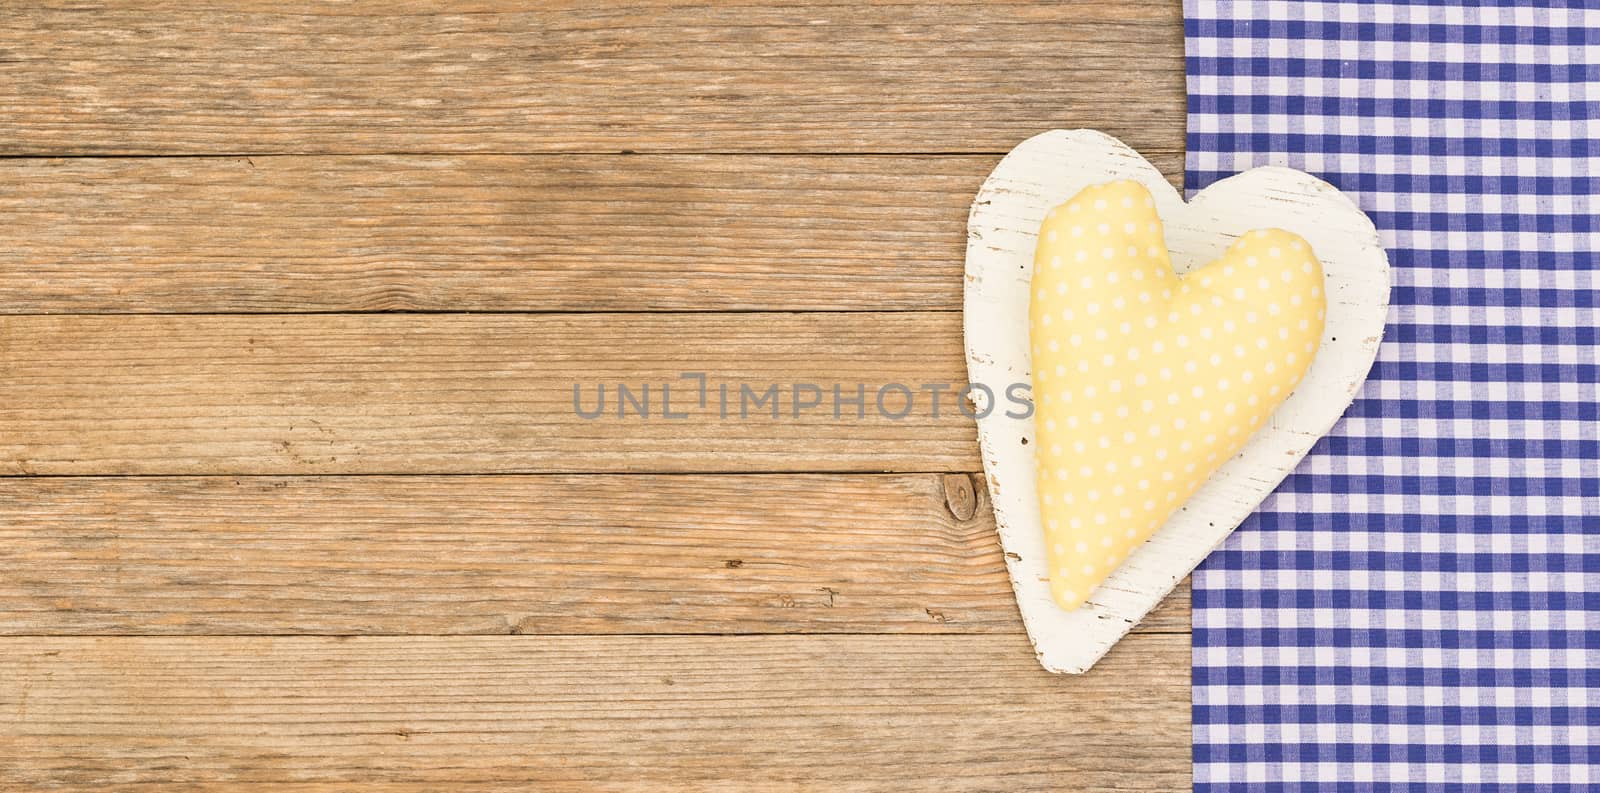 Yellow fabric heart on blue textile frame and wood background with copy space